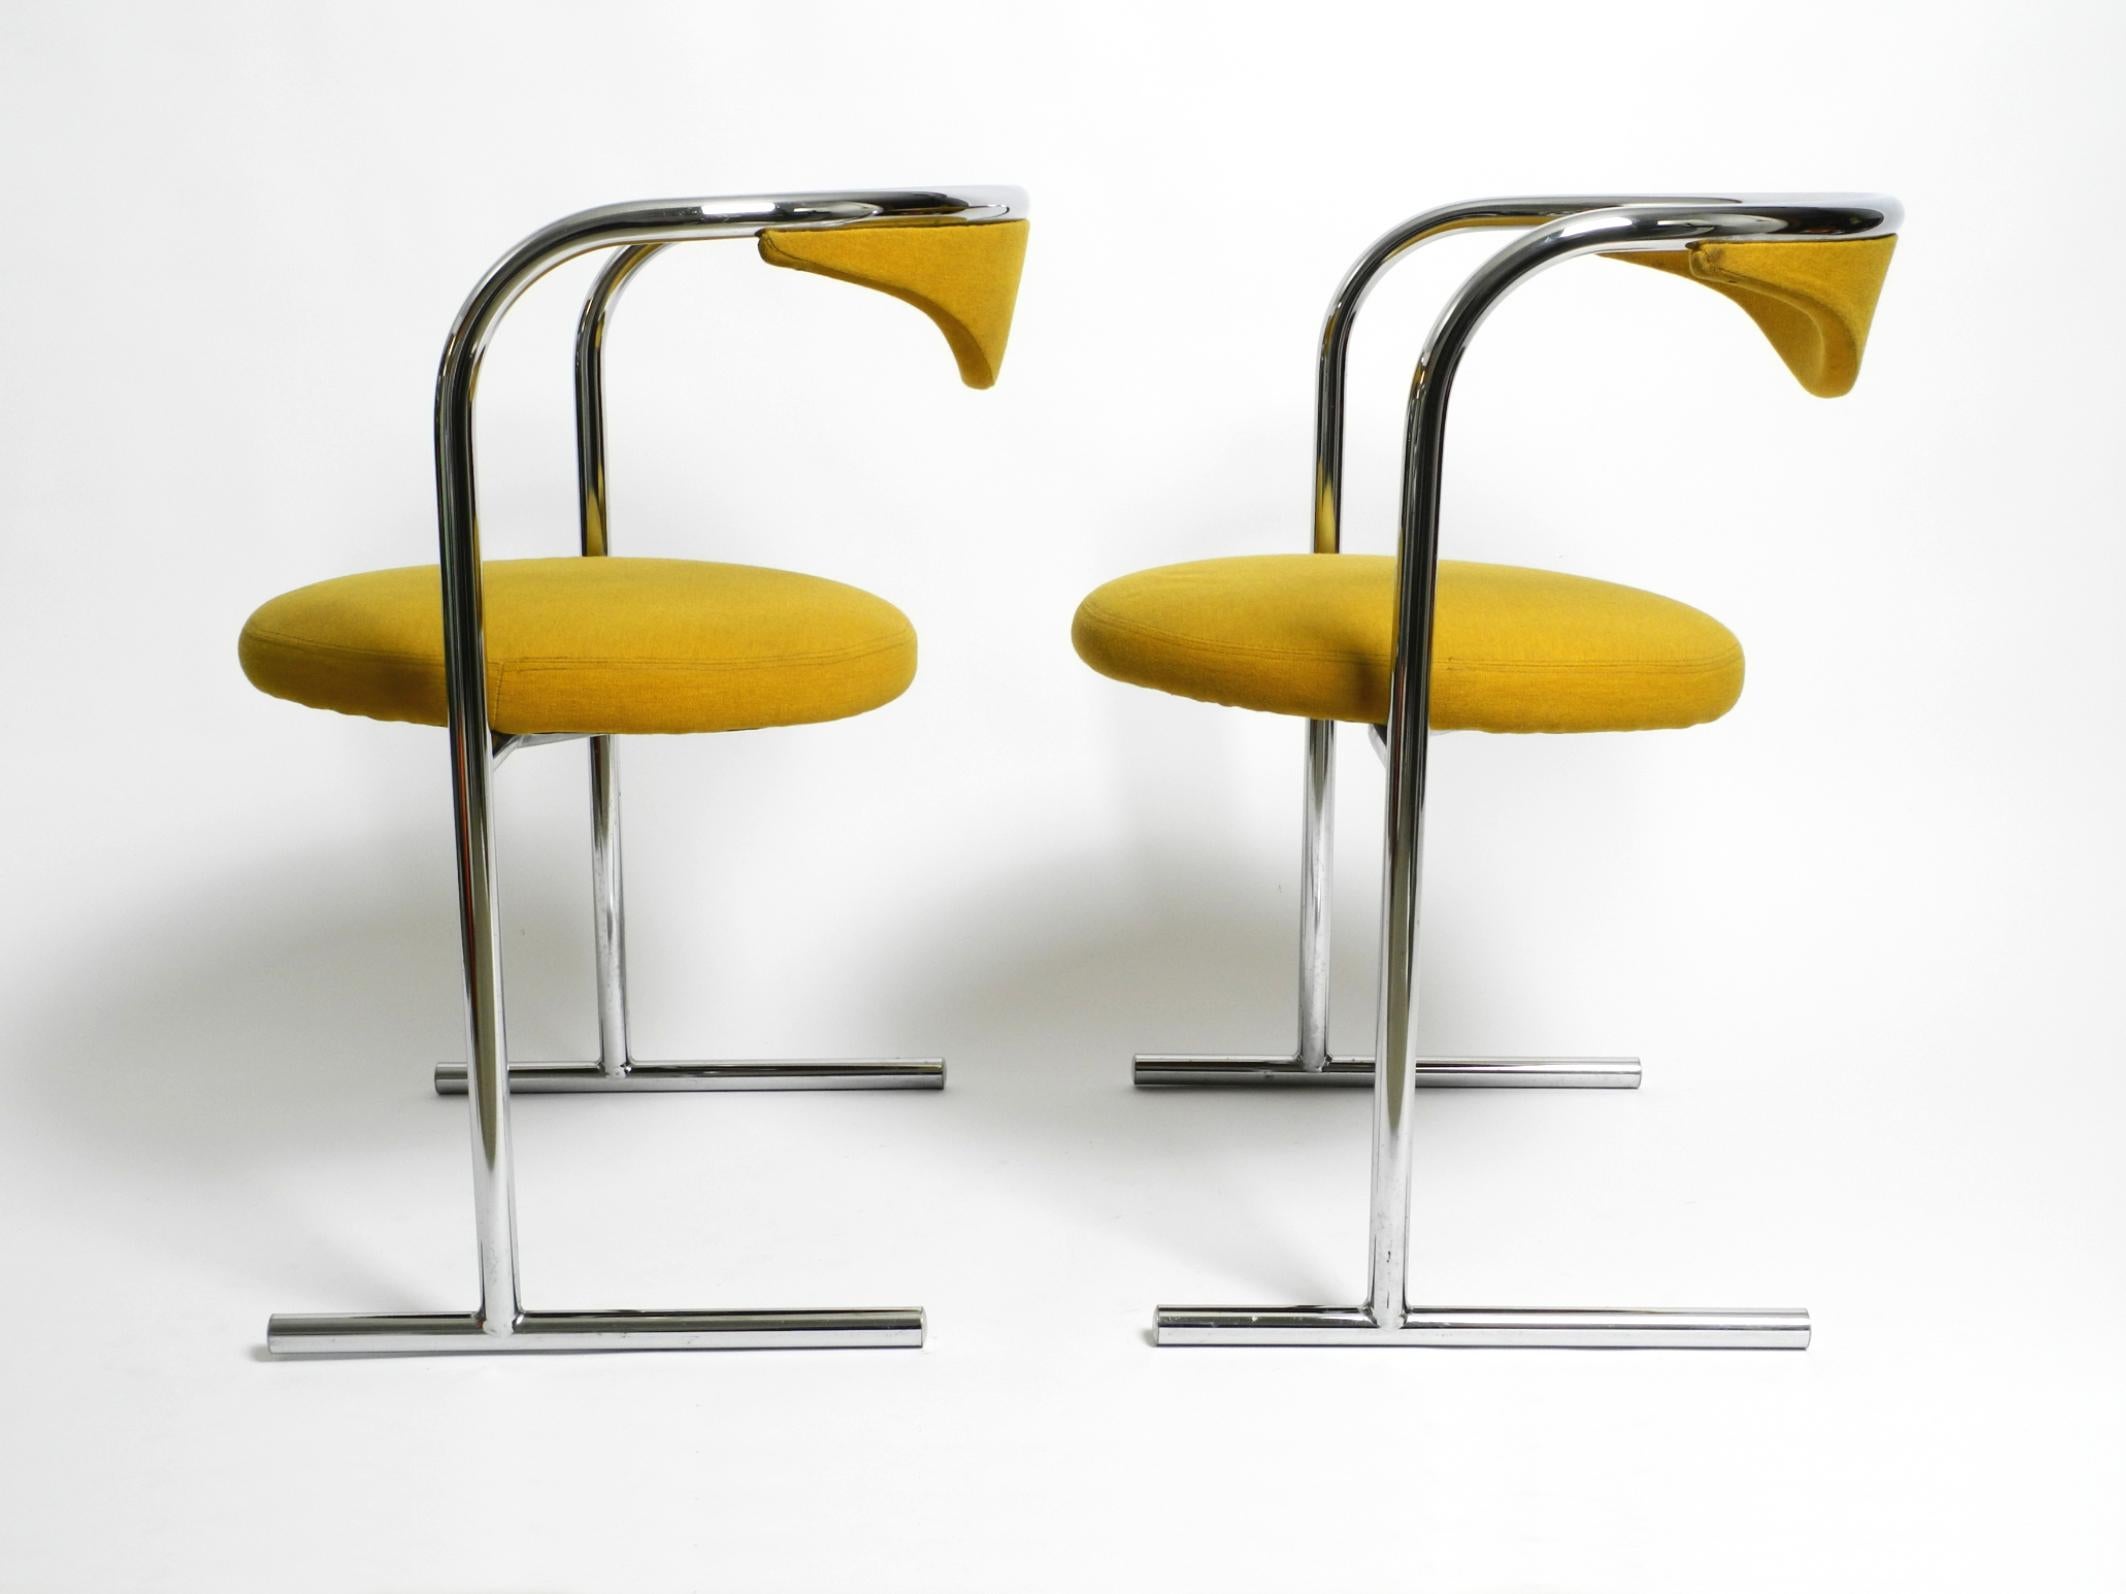 Two original 1970s tubular steel upholstered chairs by Hanno von Gustedt for Thonet model S30.
Great high quality Space Age design. Made in Germany.
Winner of the IF Design Award in 1974.
Frame is made of chrome-plated tubular steel, seat ia made of